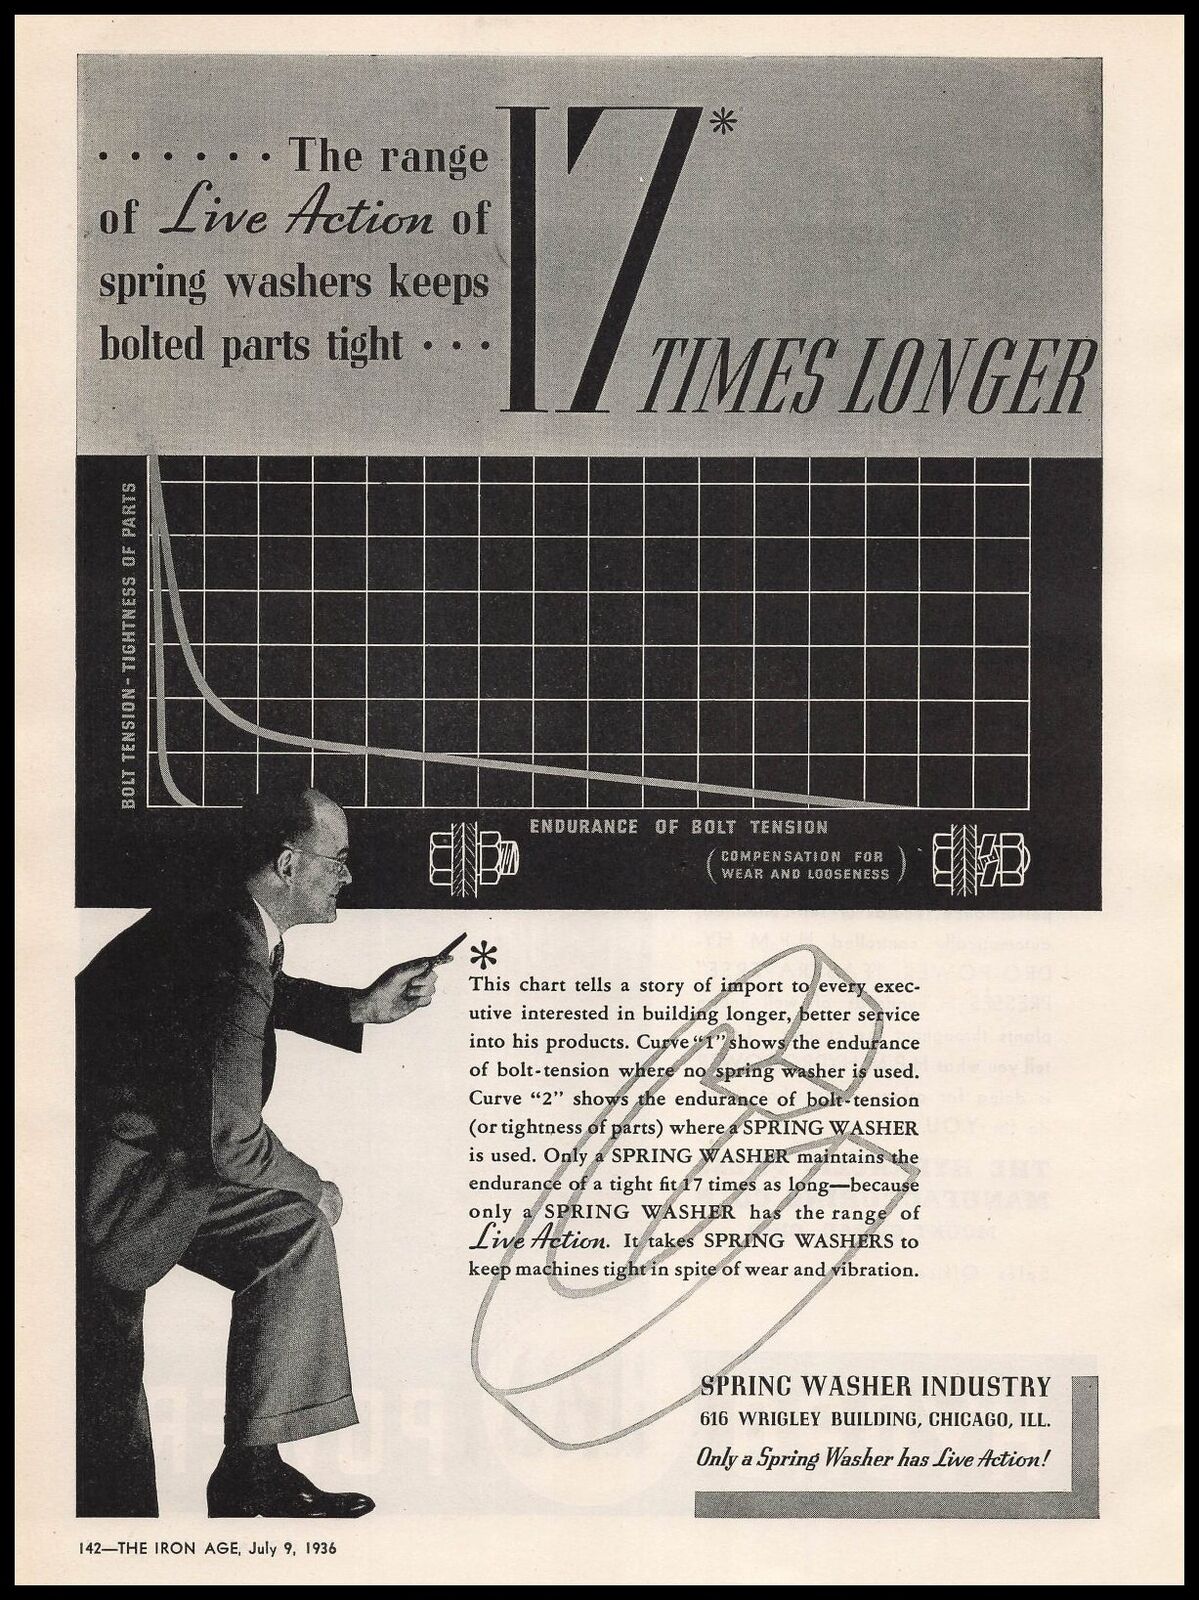 1936 Spring Washer Industry Chicago IL Endurance Of Bolt Tension Chart Print Ad